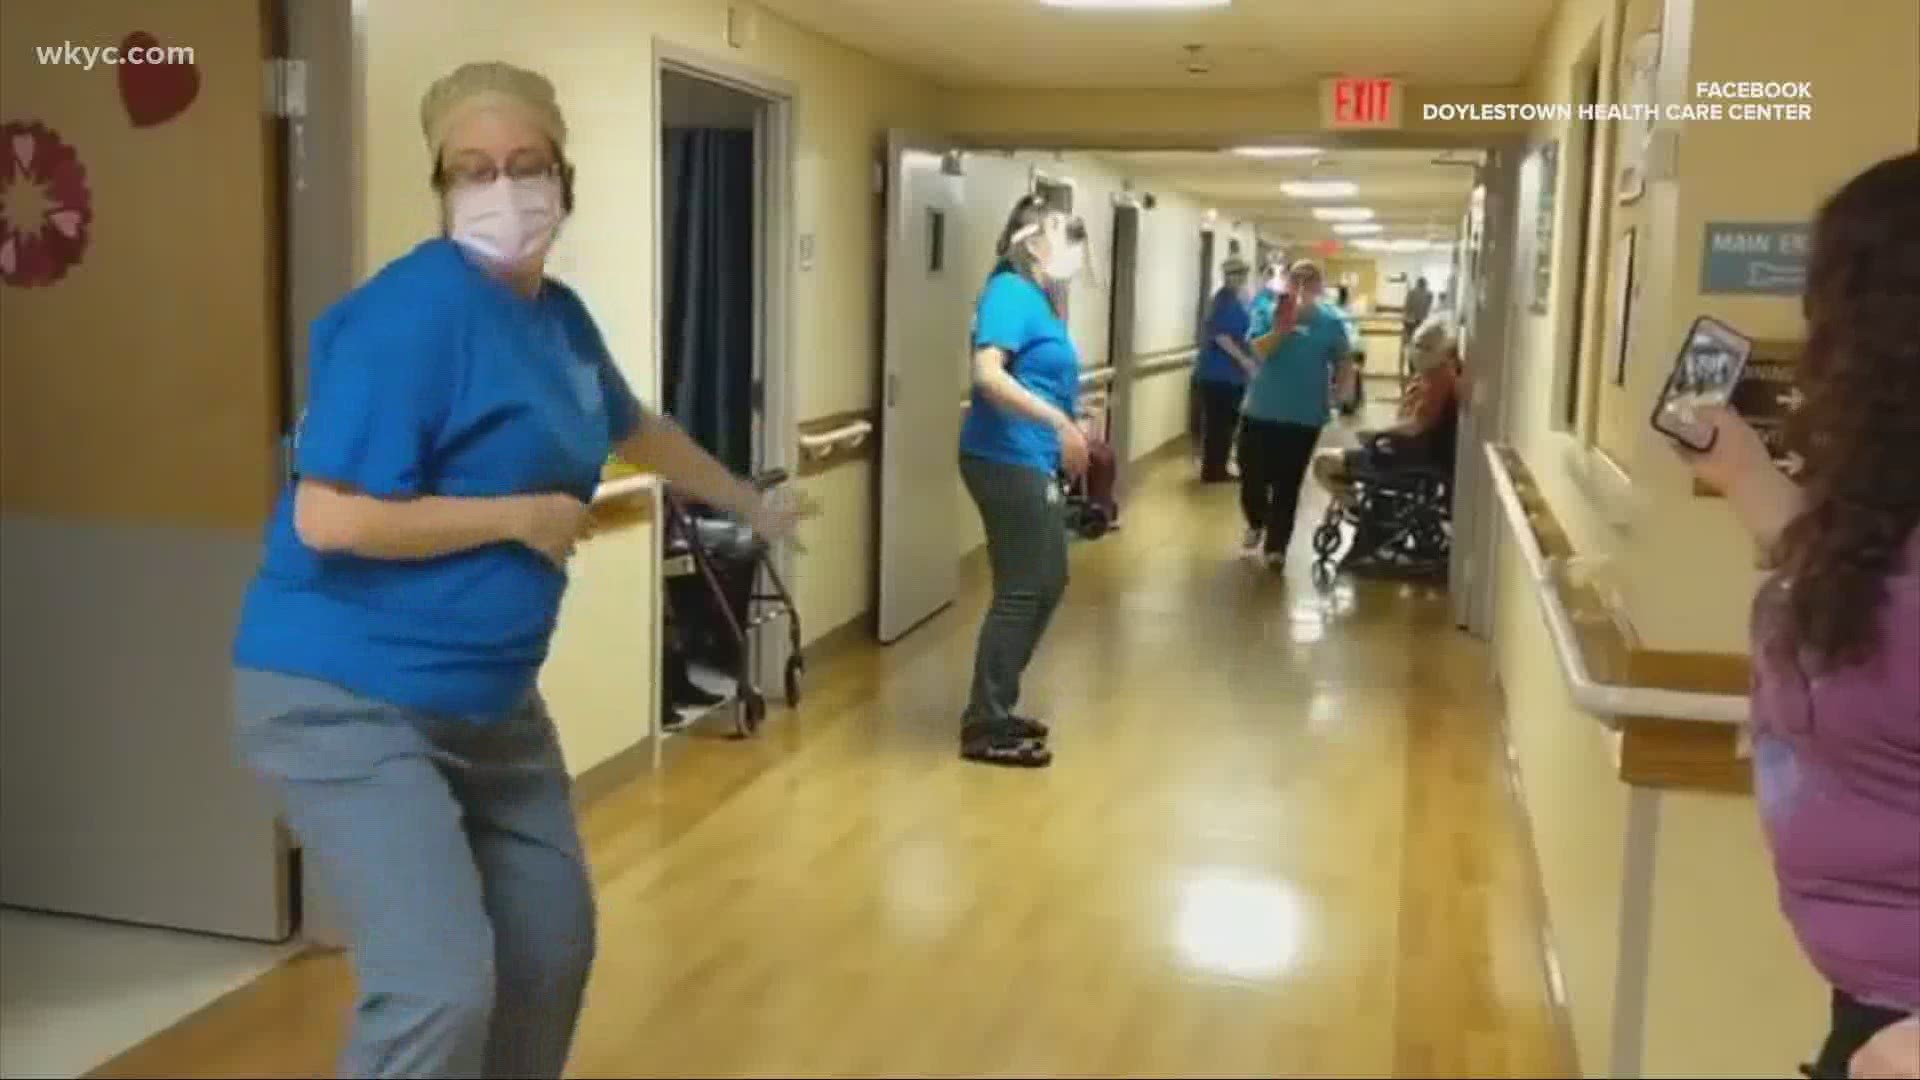 With visitors not permitted at nursing homes amid coronavirus concerns, staff at Doylestown Health Care Center found a creative way to help their residents smile.